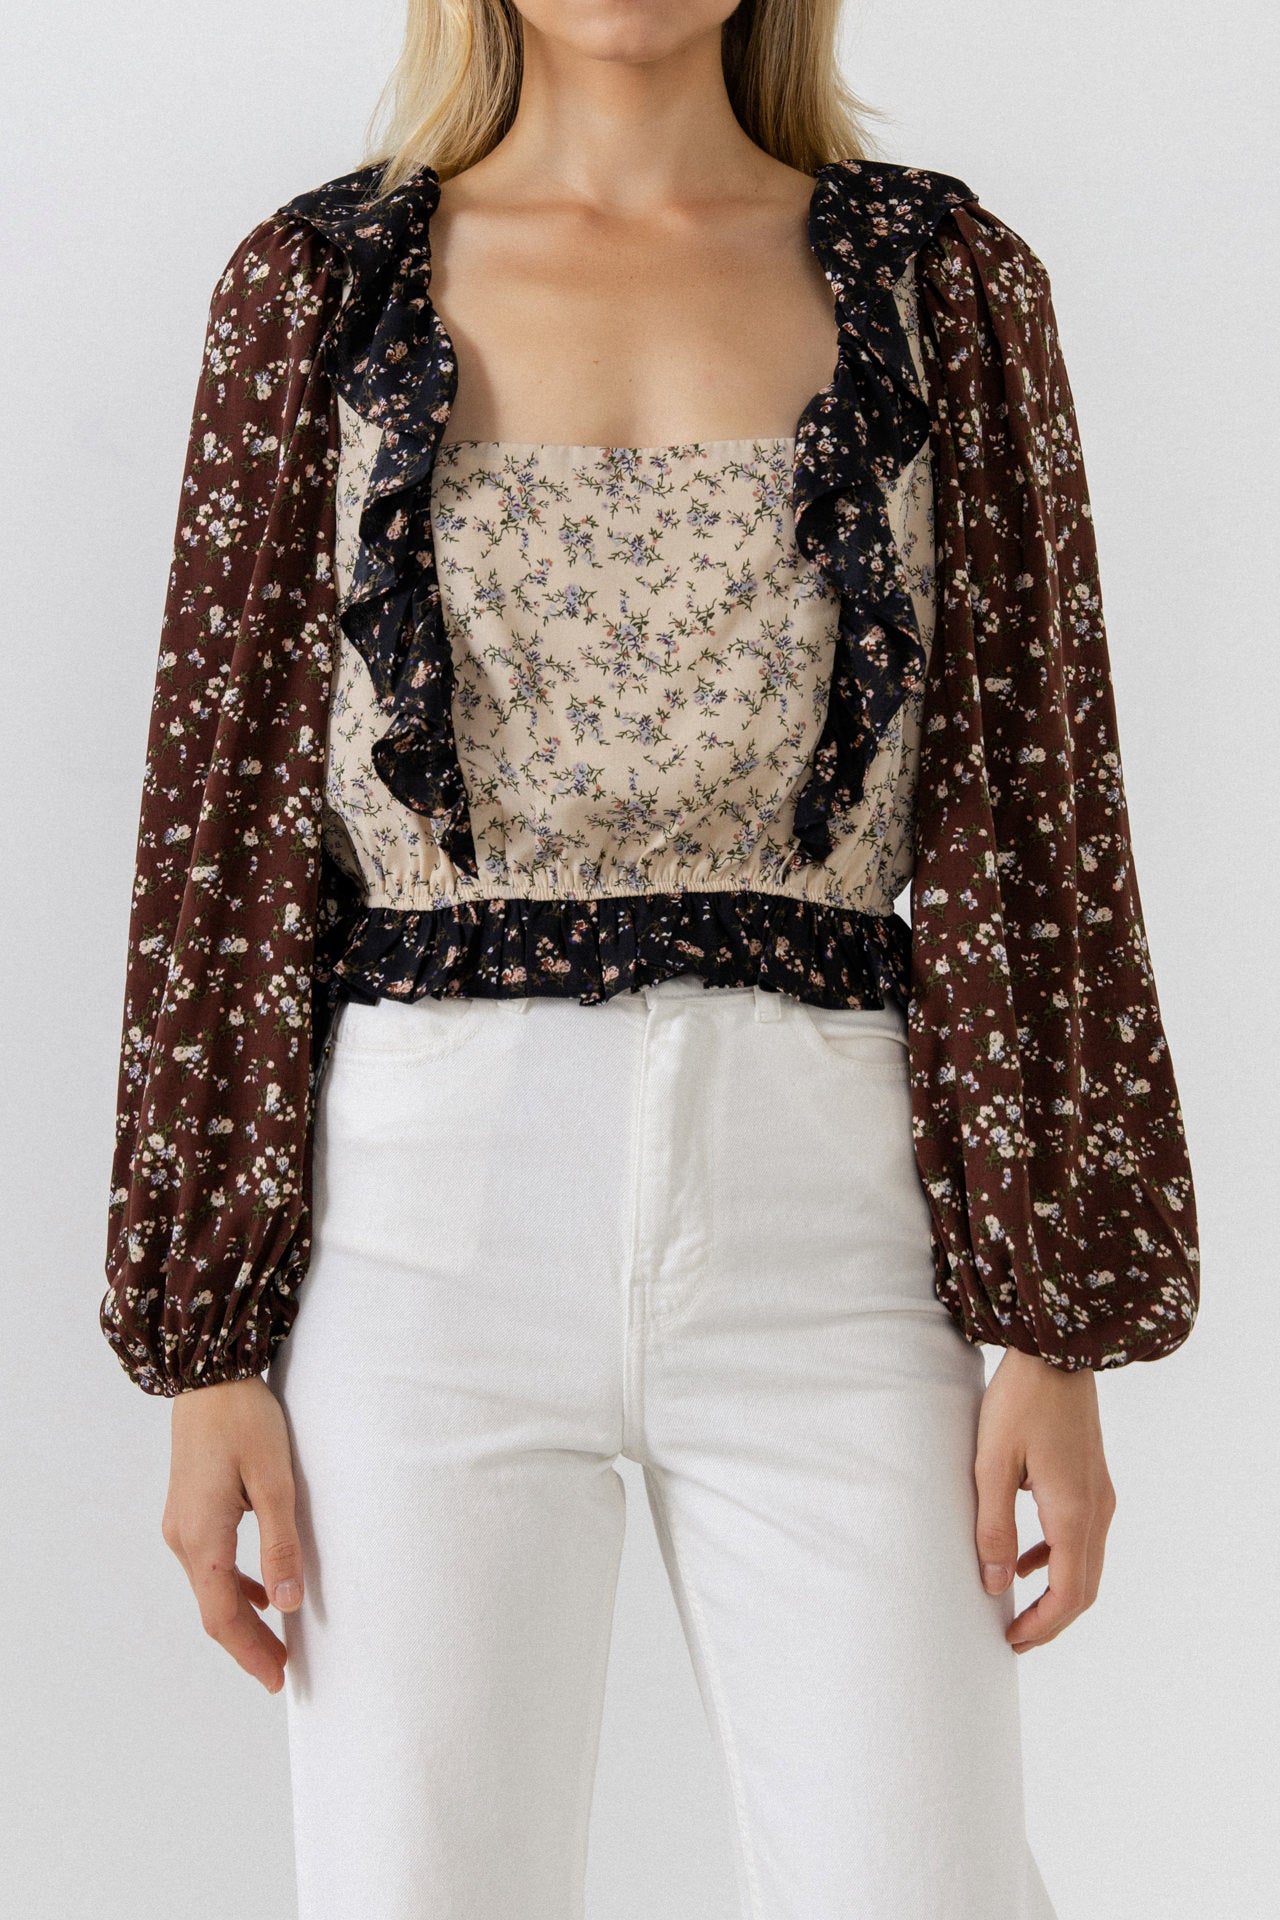 FREE THE ROSES - Floral Color Block Top - SHIRTS & BLOUSES available at Objectrare